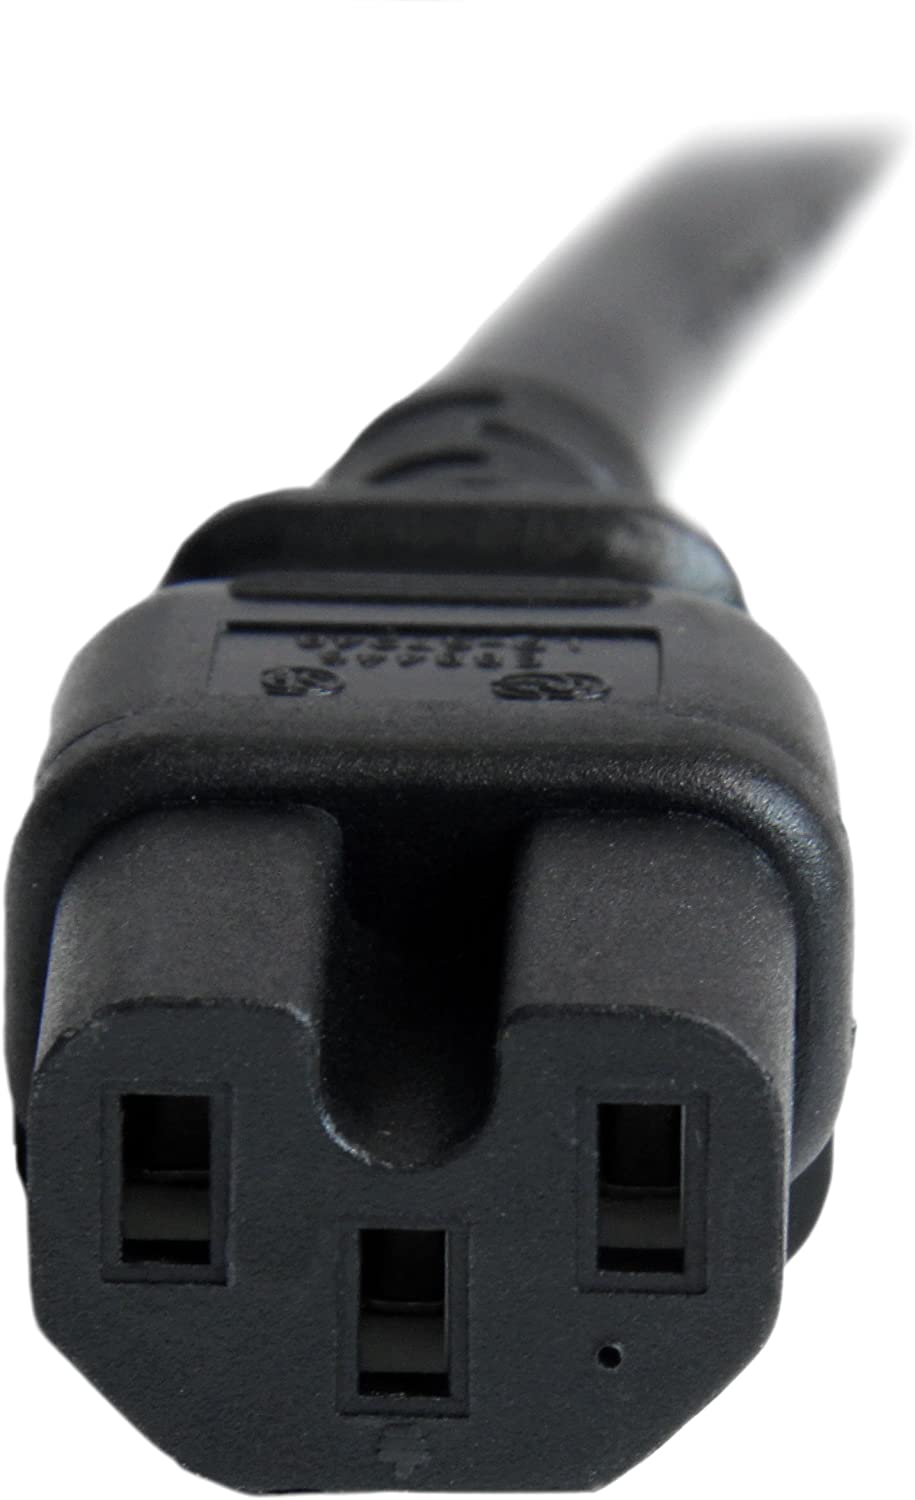 StarTech.com 3ft (1m) Heavy Duty Extension Cord, IEC 320 C14 to IEC 320 C15 Black Extension Cord, 15A 125V, 14AWG, Heavy Gauge Power Extension Cable, Heavy Duty AC Power Cord, UL Listed (PXTC14C153) 3 ft / 1m 14 AWG